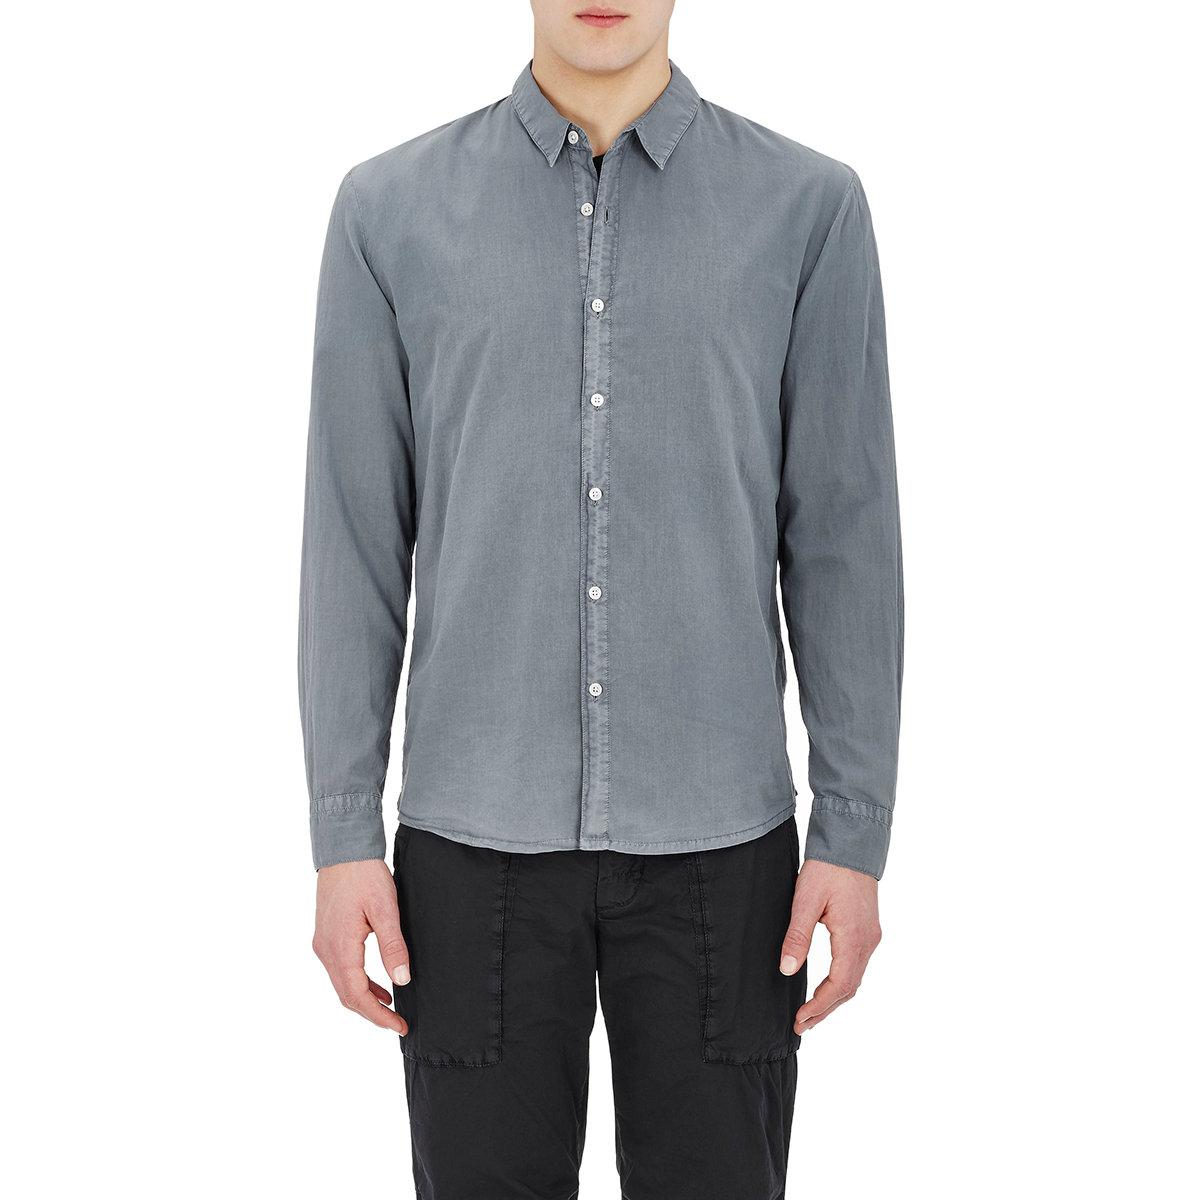 James perse Standard Cotton Shirt in Gray for Men | Lyst